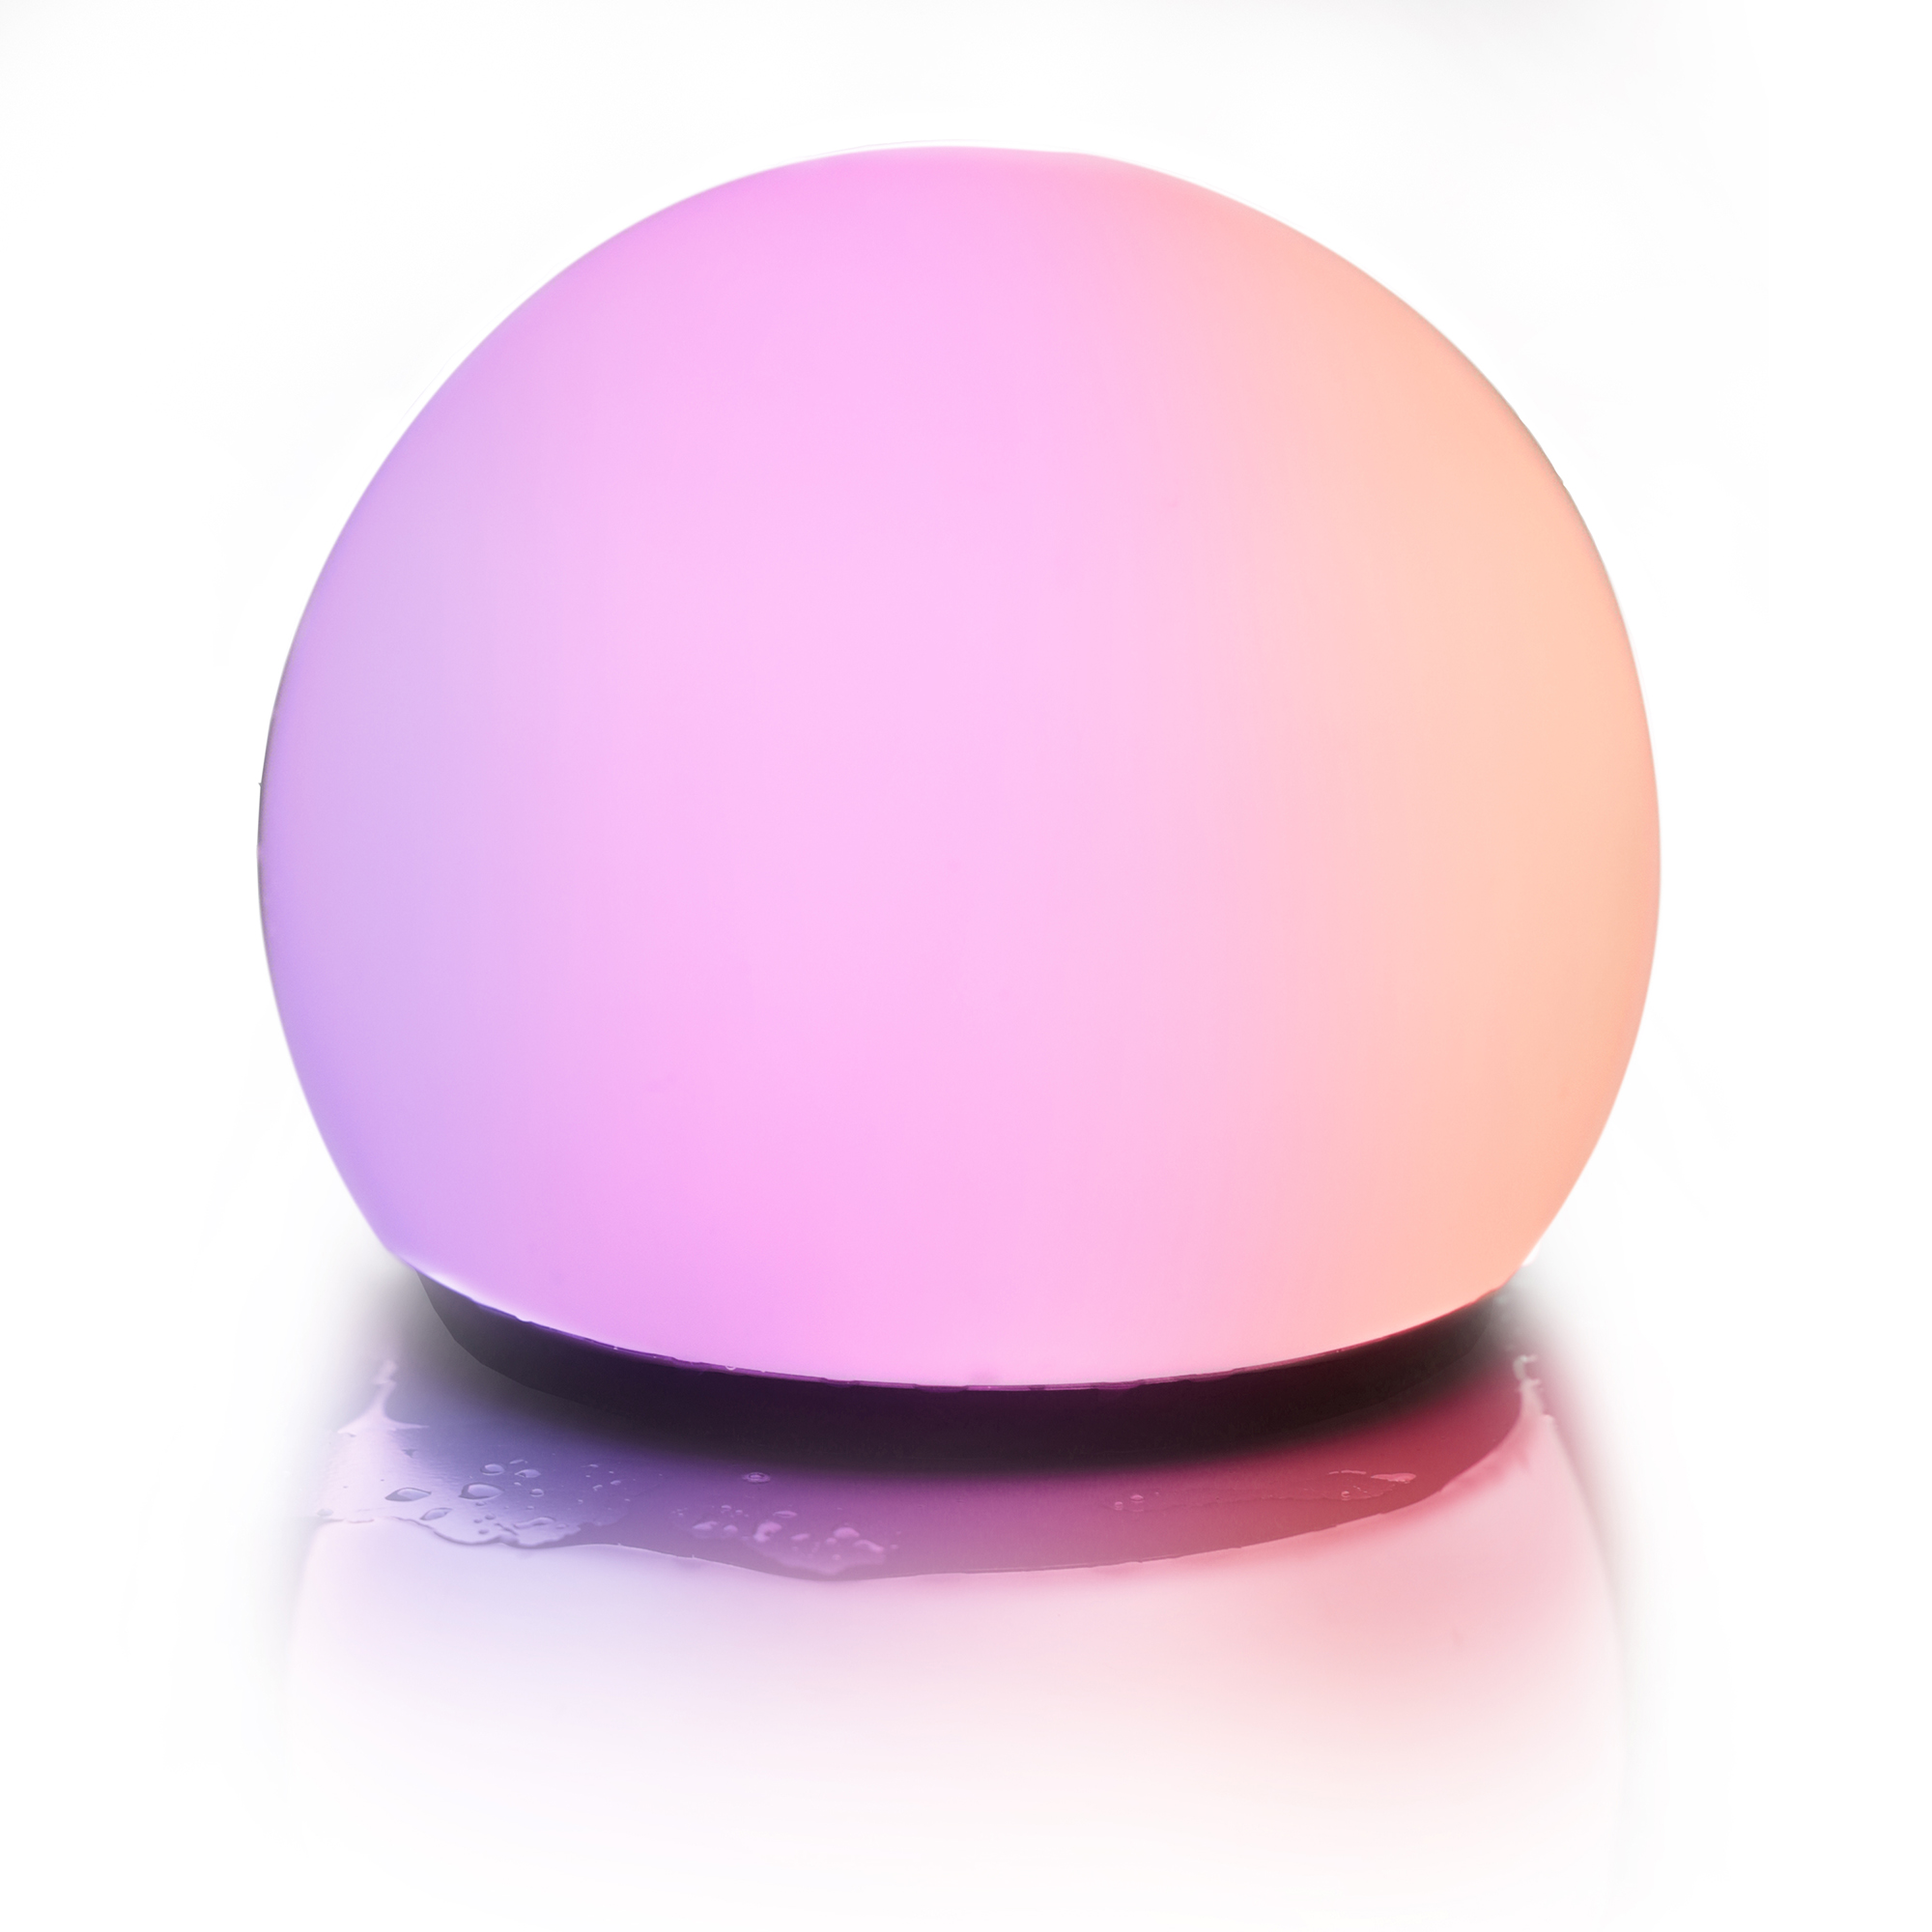 Monster LED 7-inch Orb Color Flow Smart Portable LED Light Ball, Indoor/Outdoor Use, Mobile App Control - image 5 of 6